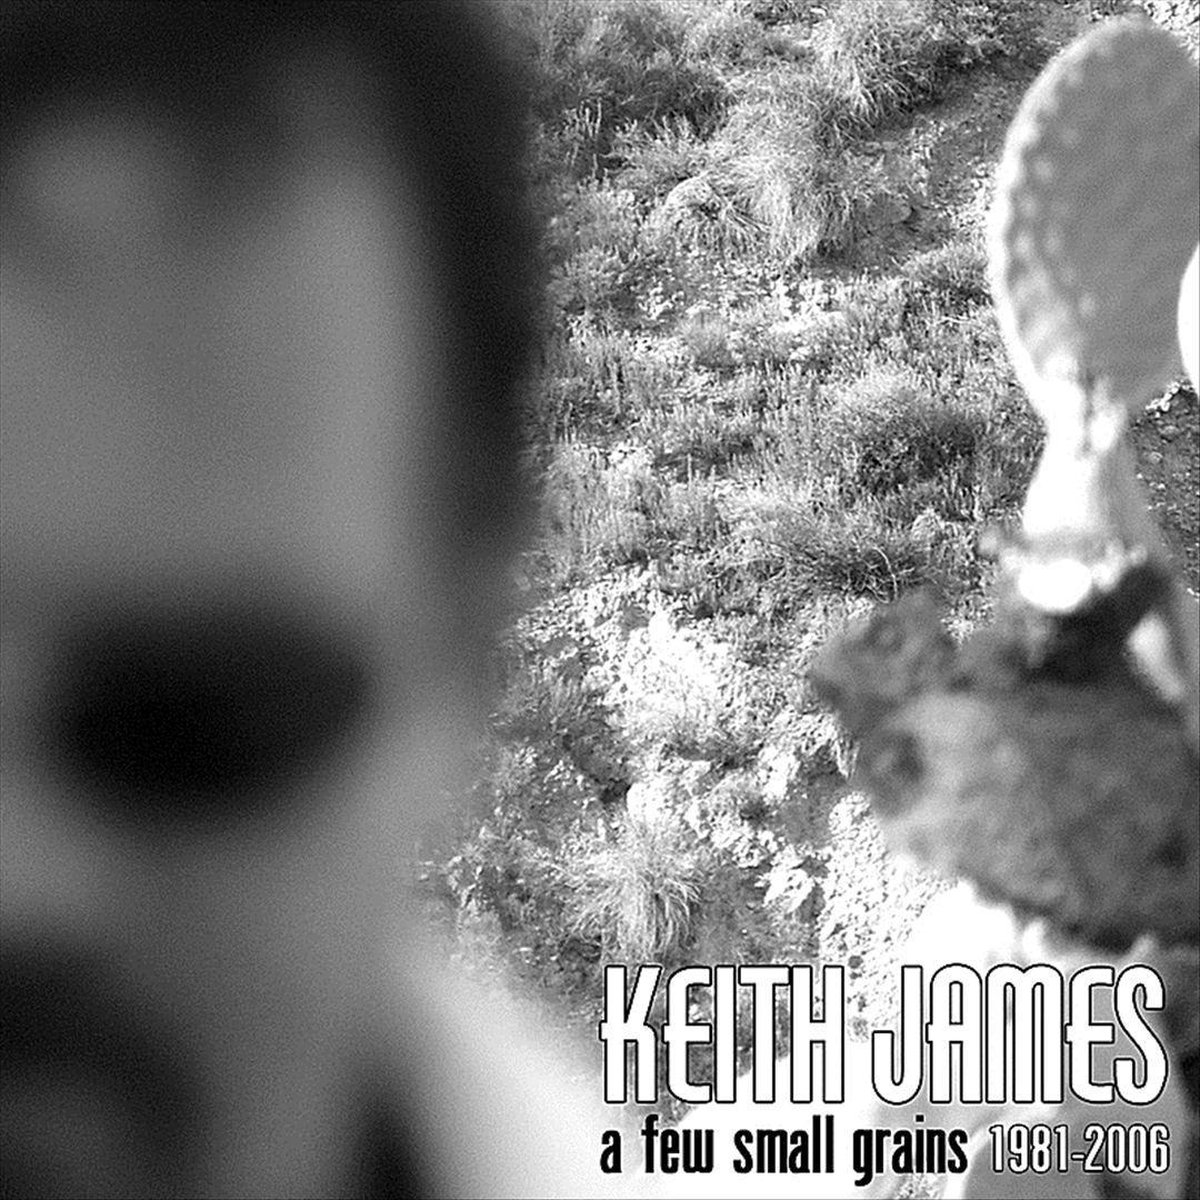 A Few Small Grains 1981 - 2006 - Keith James